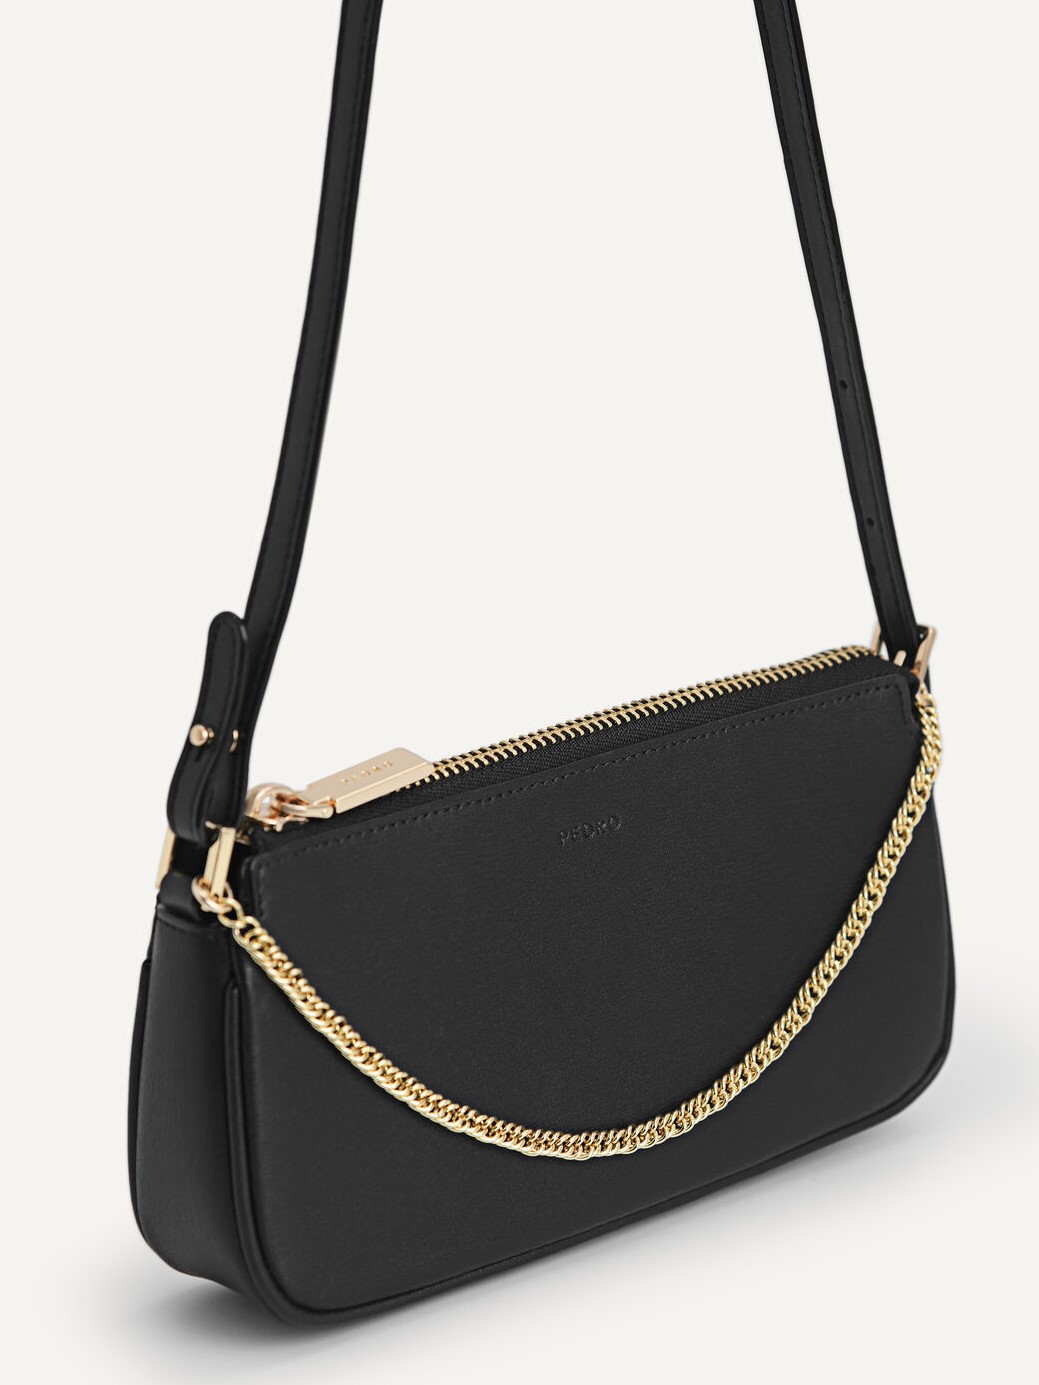 TÚI XÁCH NỮ PEDRO MADDY LEATHER CHAIN DETAILED SHOULDER BAG 10